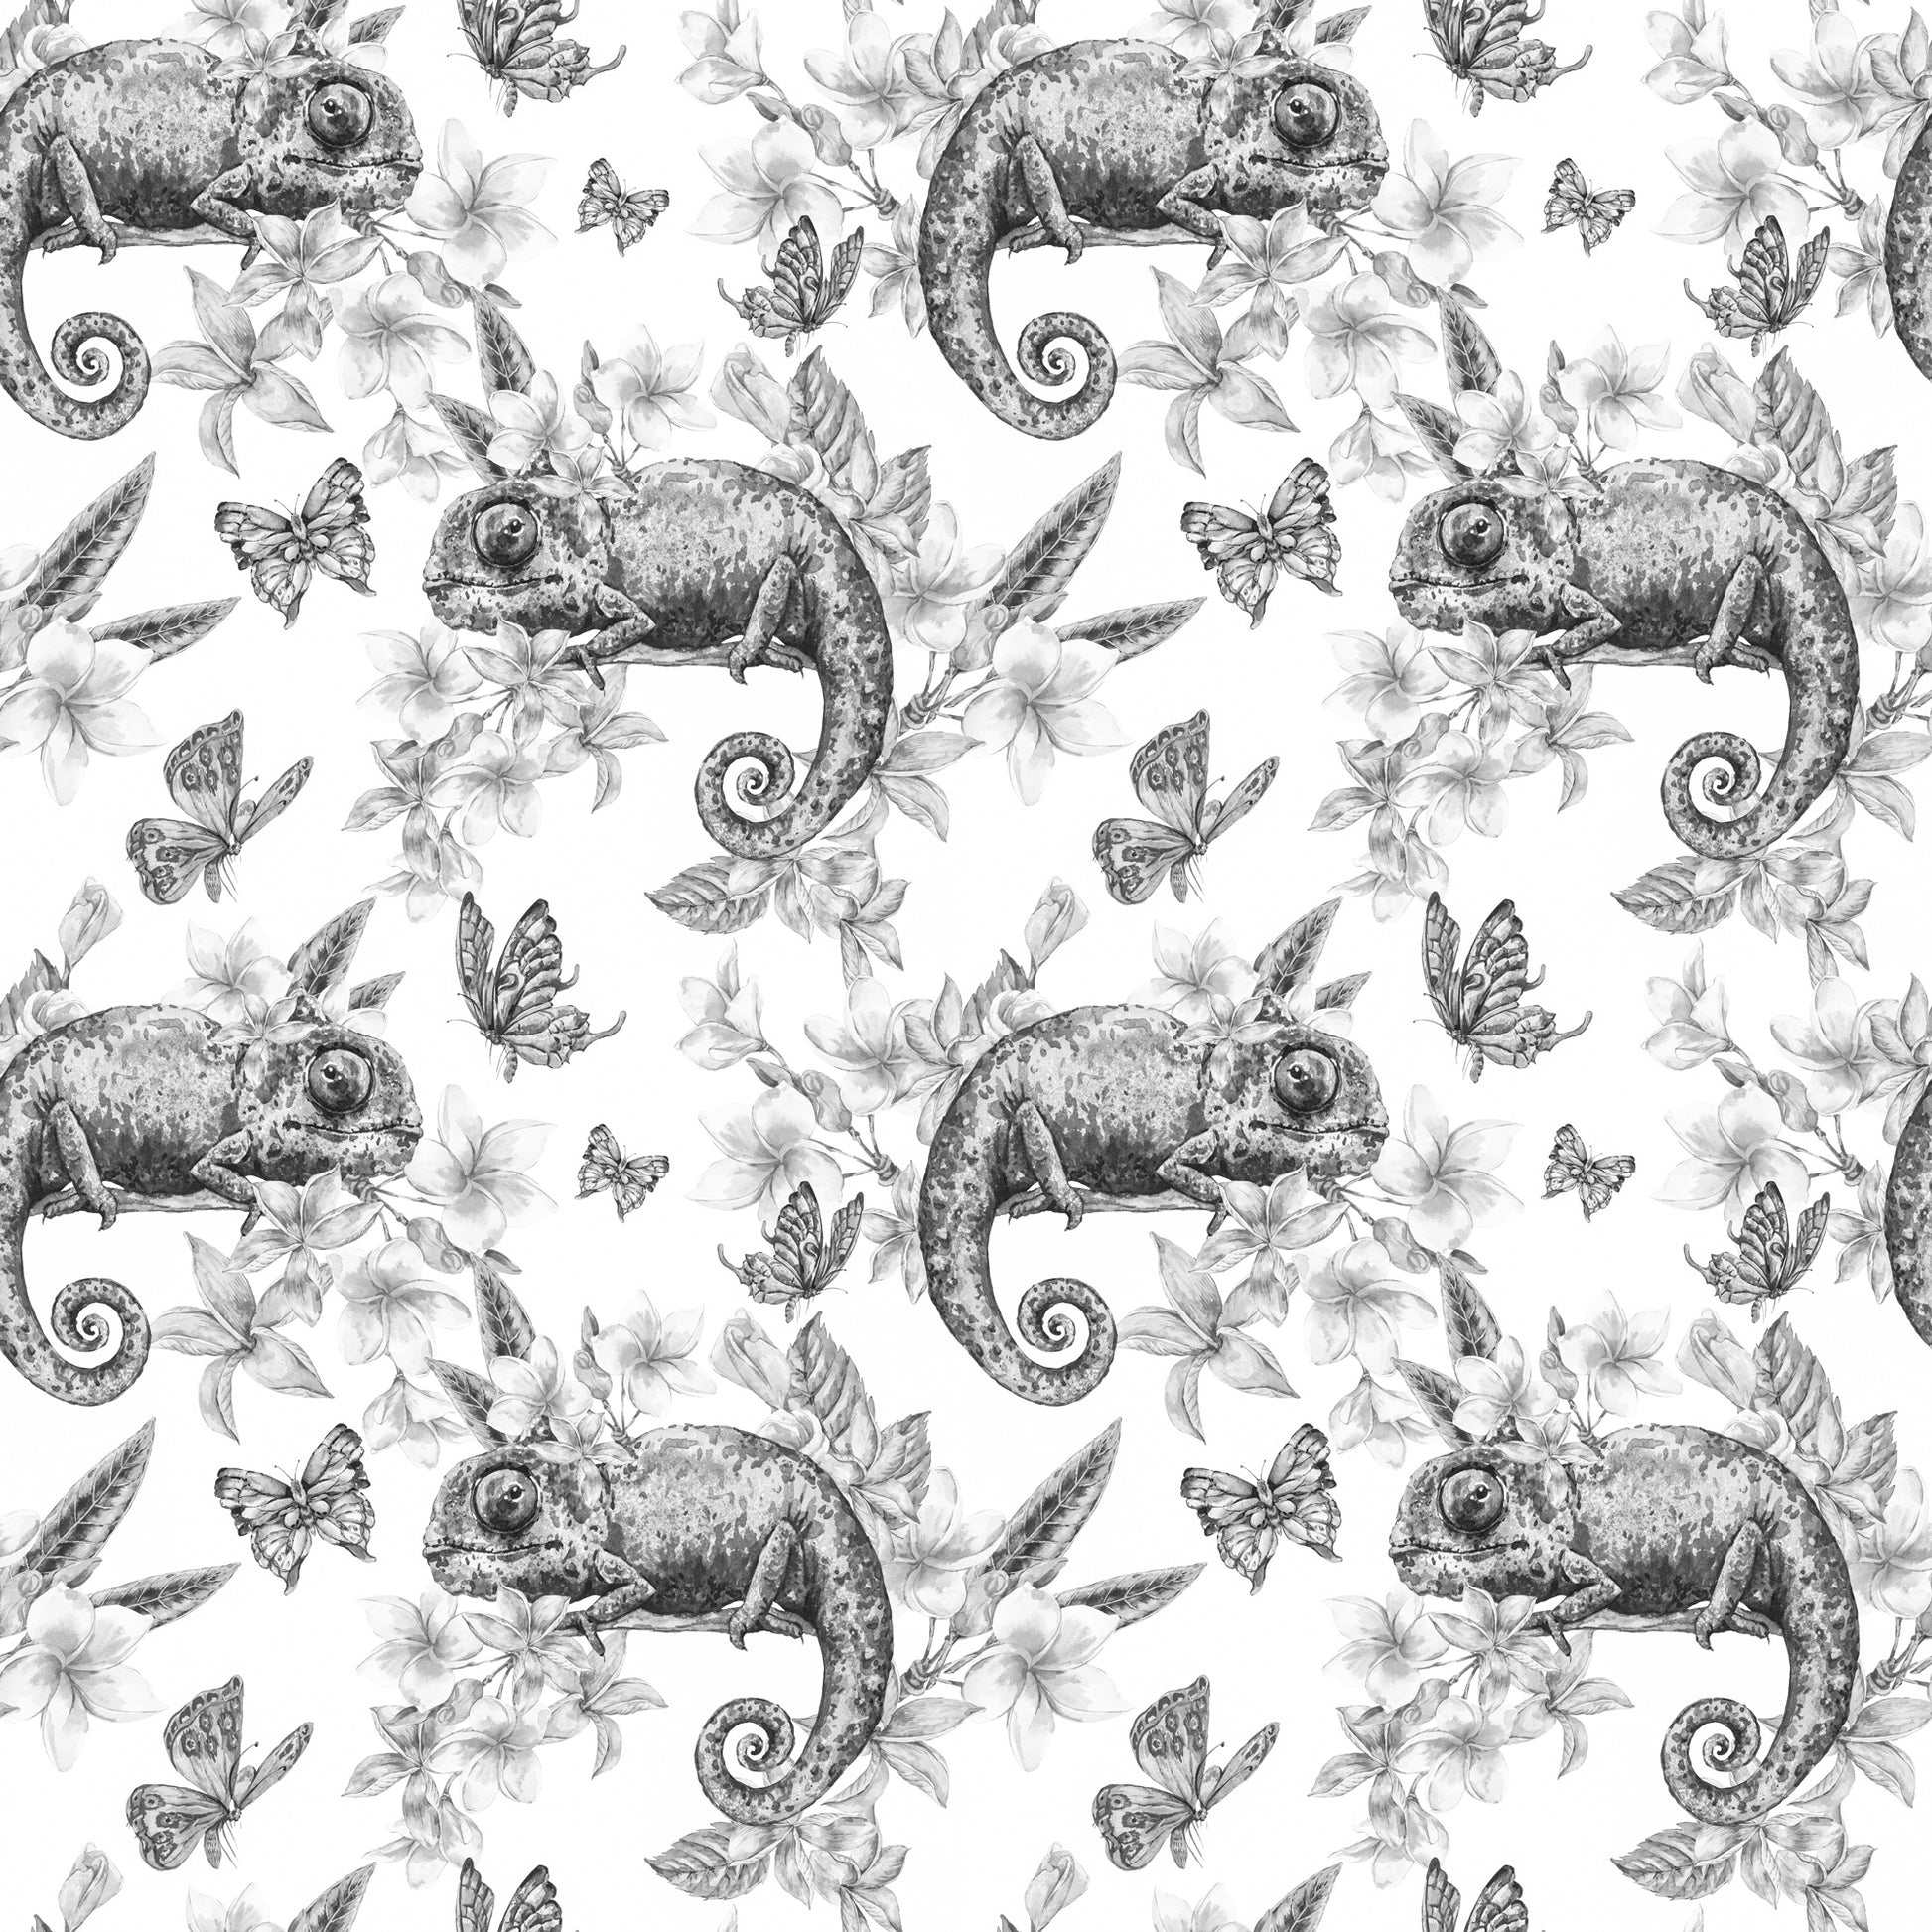 Jackson chameleon butterfly and flowers grey monochrome printed vinyl furniture wrap